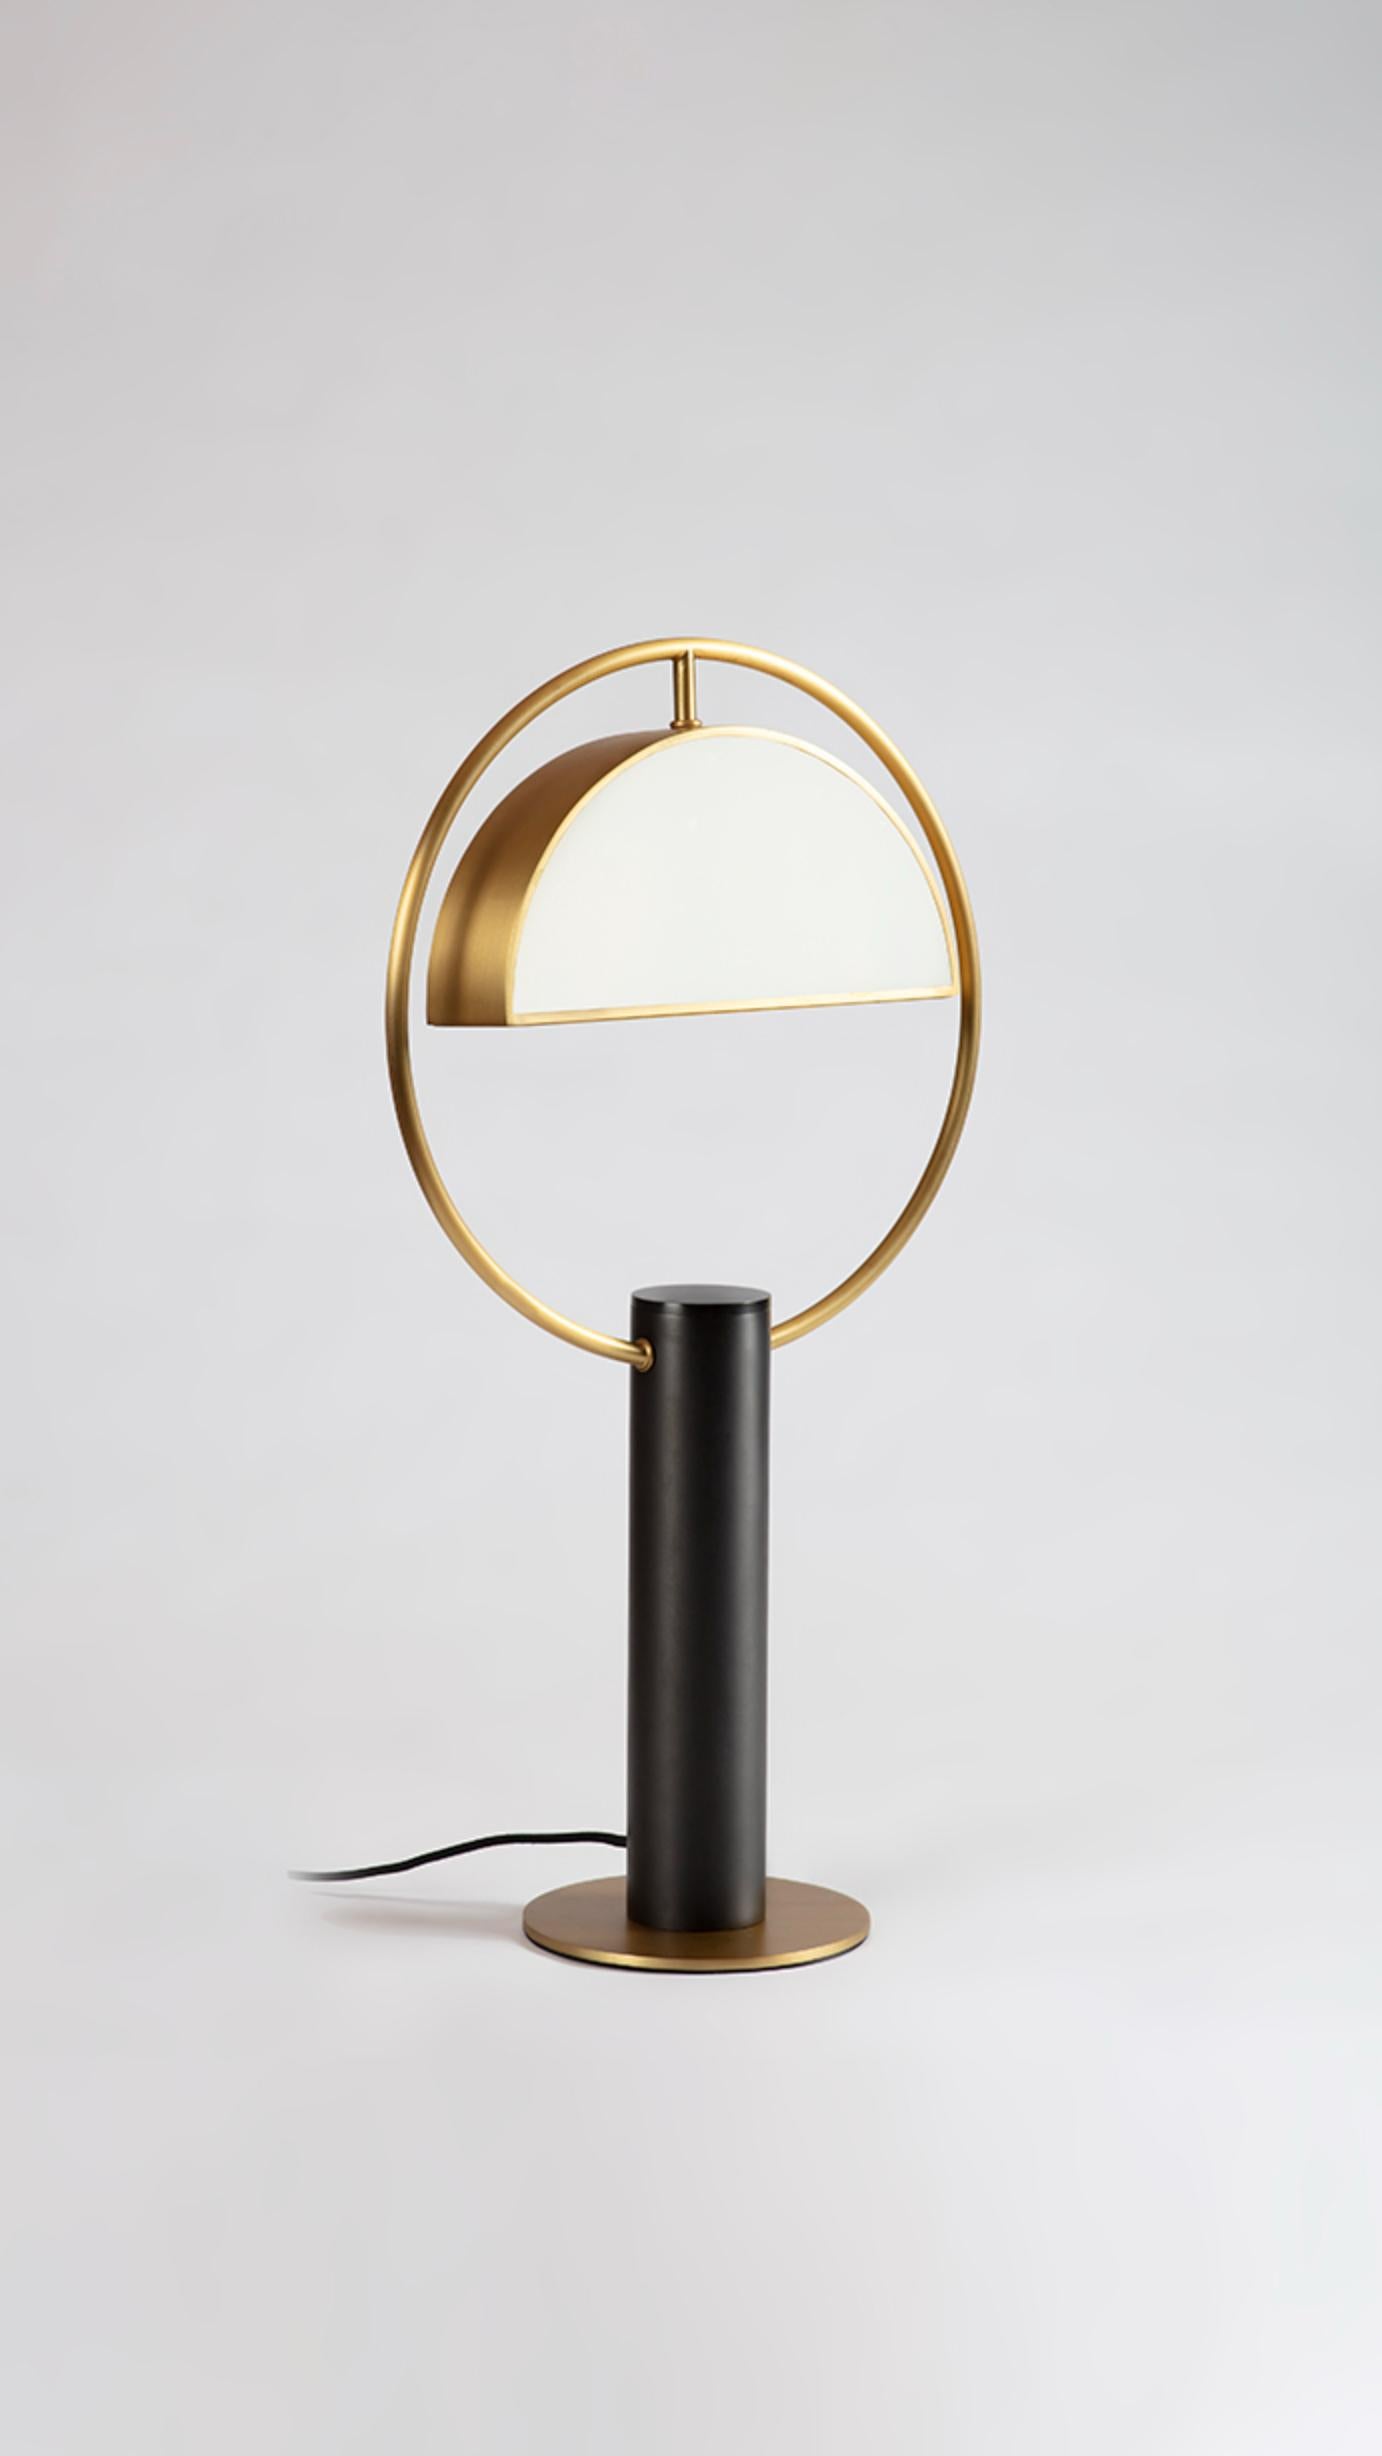 Brass Half in Circle Table Lamp by Square in Circle
Dimensions: H 55 x W 30 x D 5 cm.
Materials: brushed brass finish, white frosted glass, dark grey metal. 

Inspired by costume design from the Triadic Ballet by Oscar Schlemmer, geometric forms are